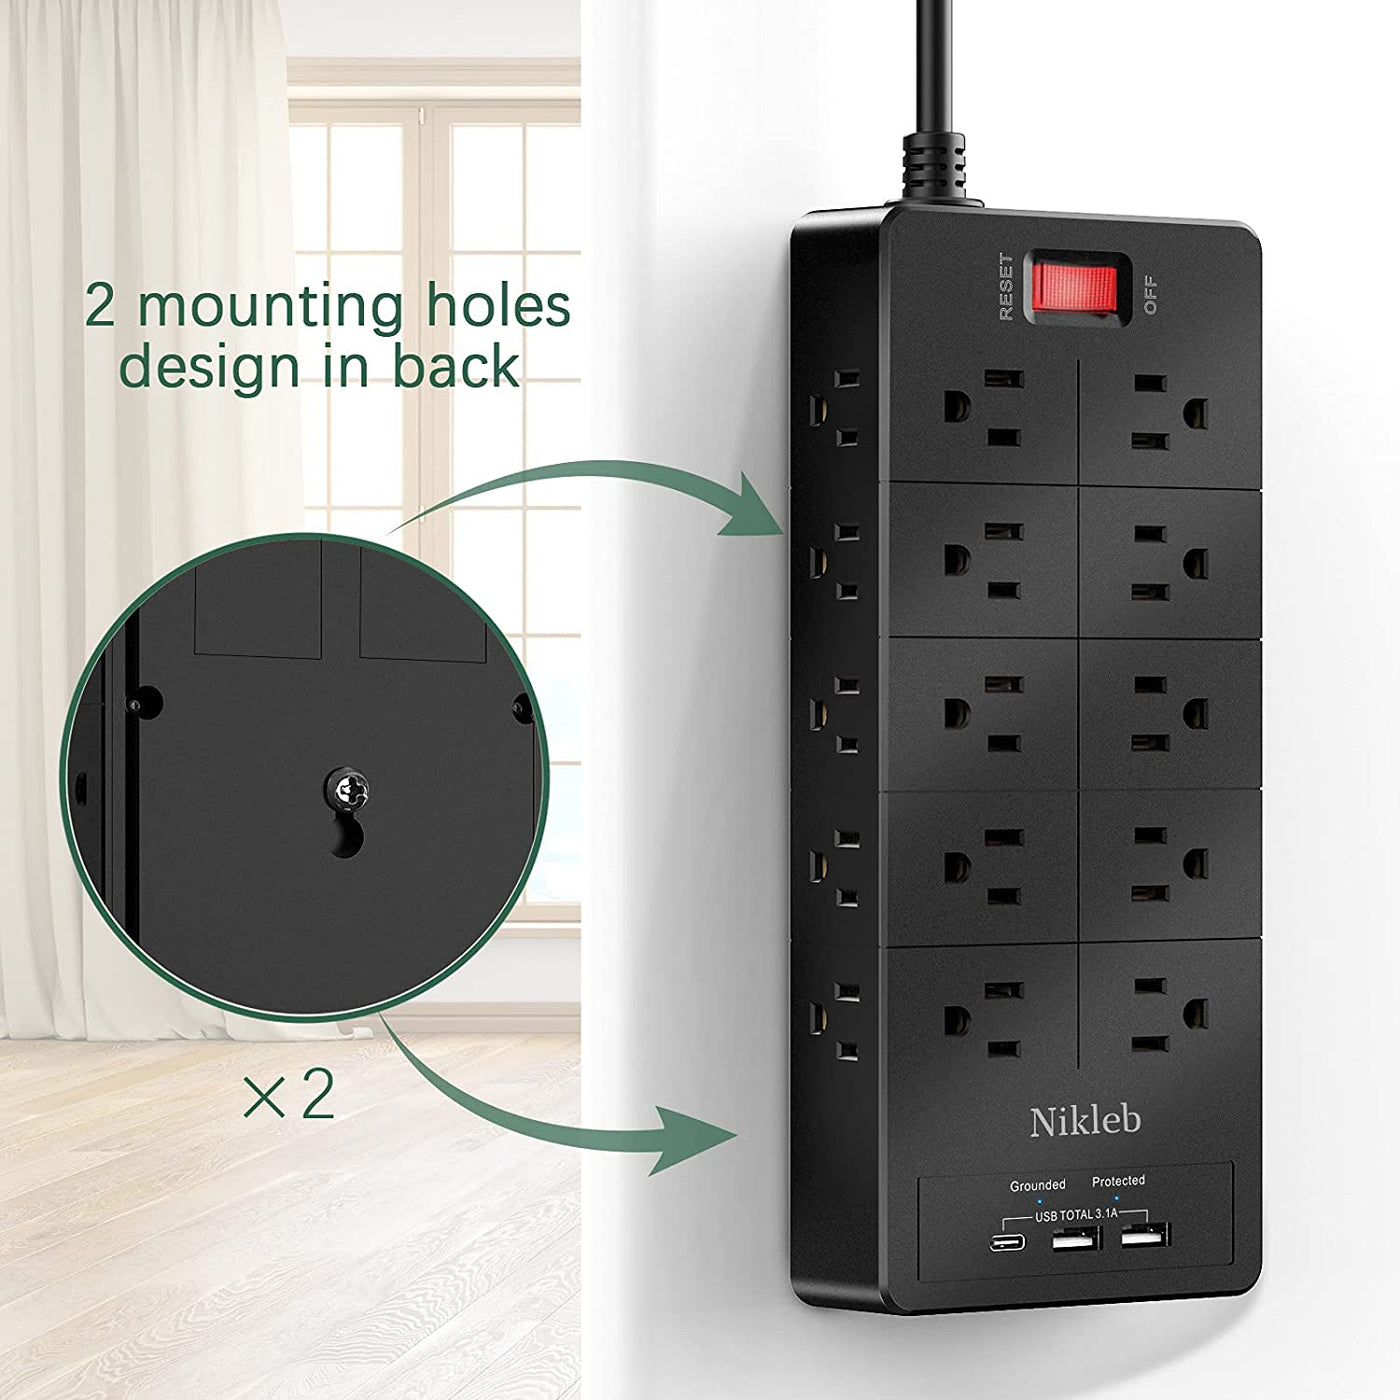 Power Strip 23 in 1, 20 Outlets Surge Protector Wall Mount